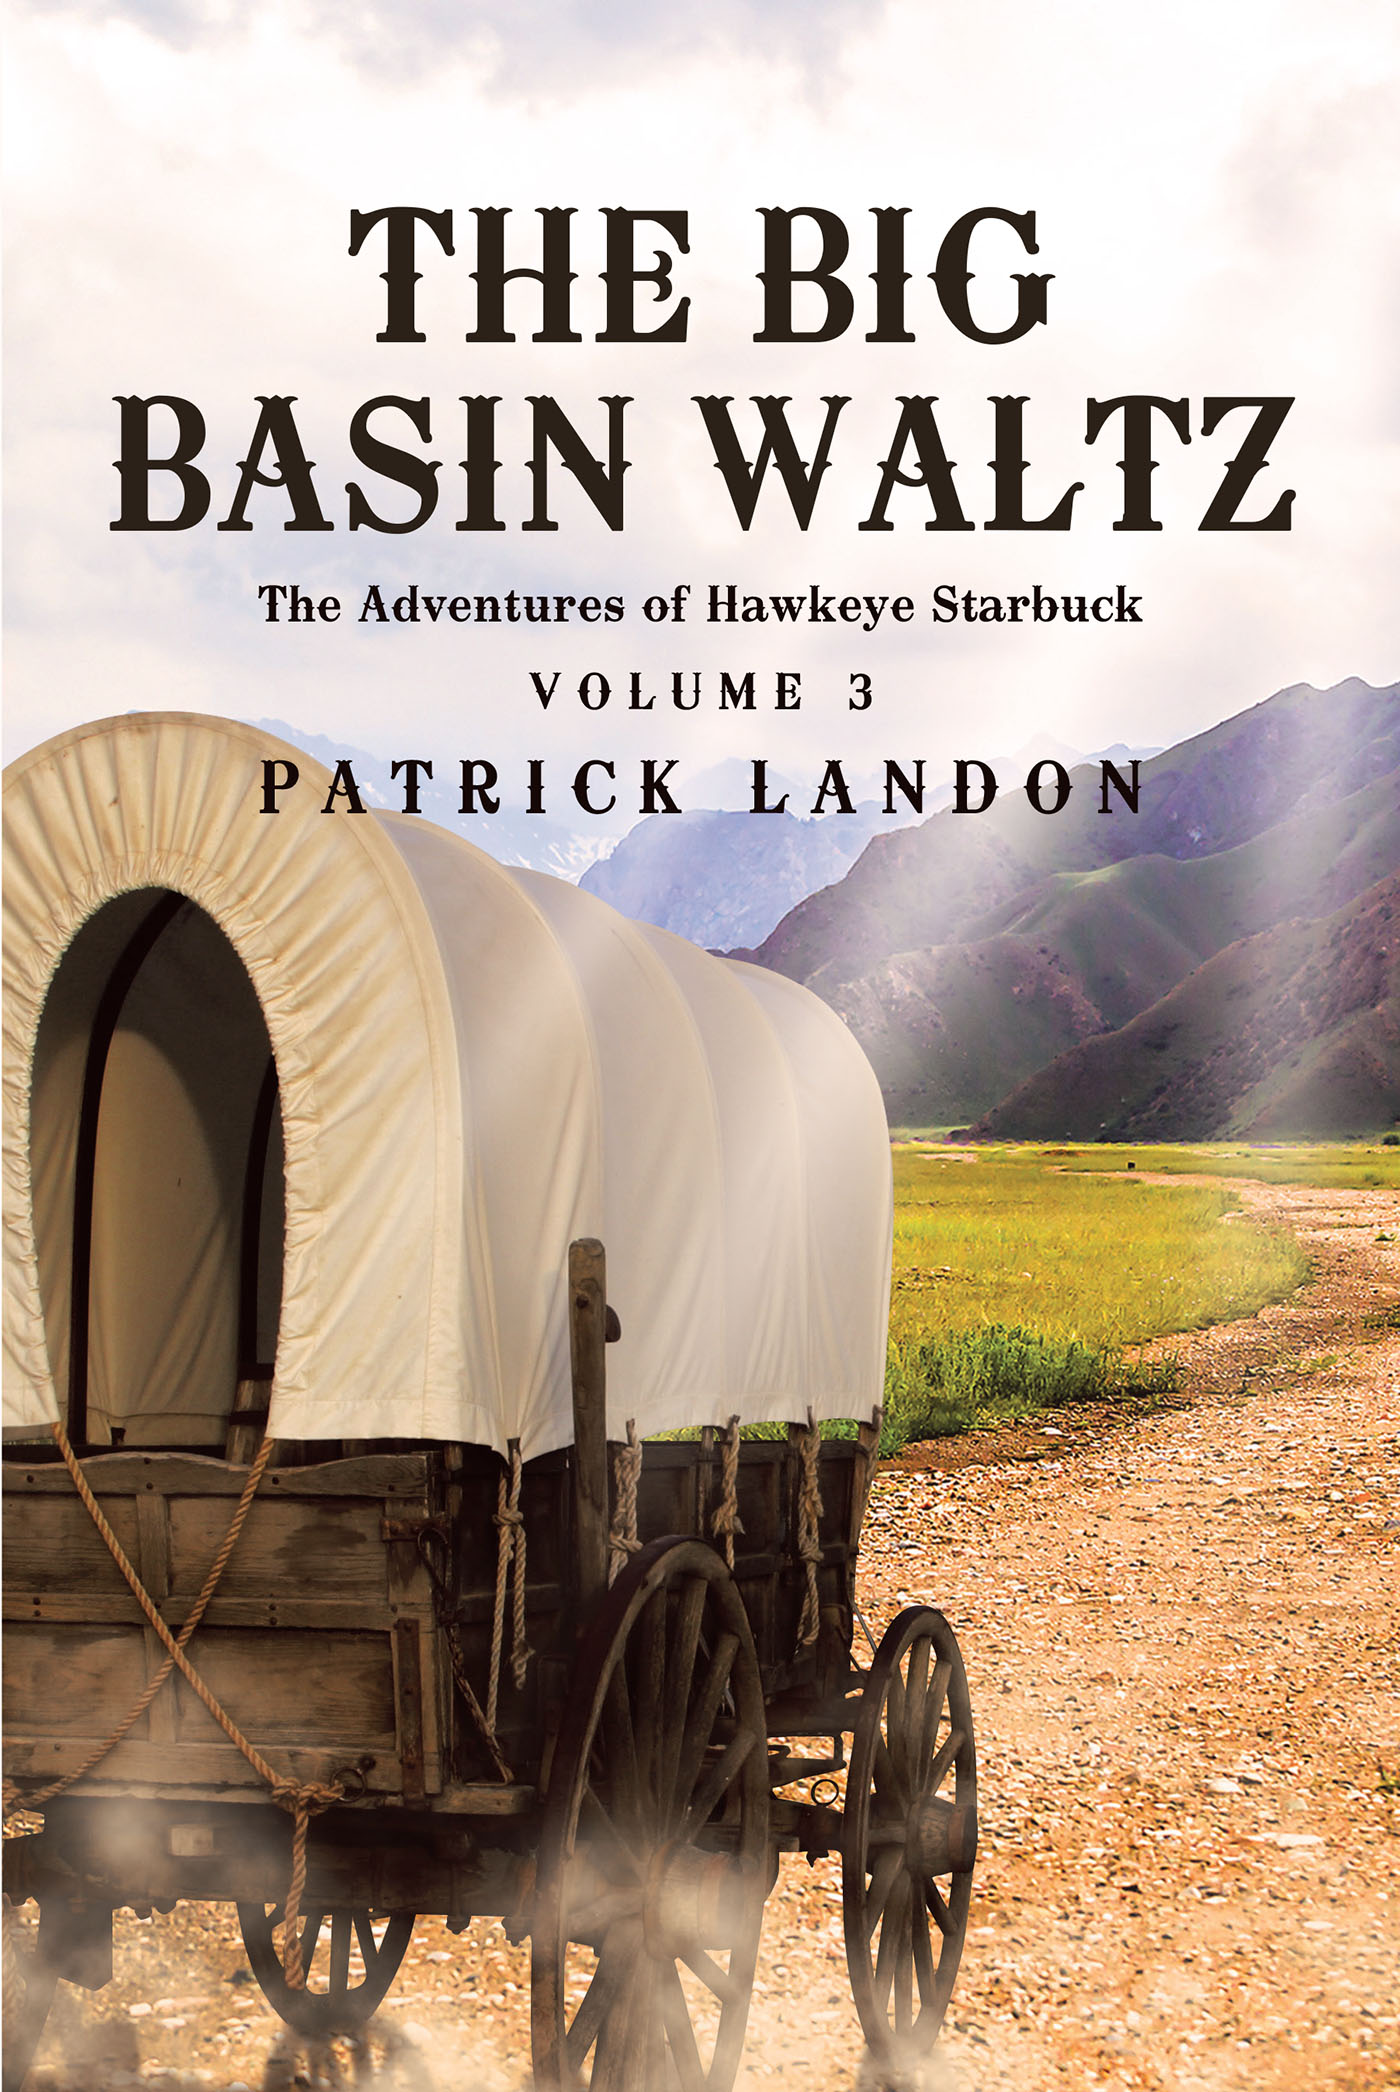 Author Patrick Landon’s New Book, "The Big Basin Waltz: The Adventures of Hawkeye Starbuck," is a Captivating Novel About the Continuing Adventures of a Rodeo Cowboy